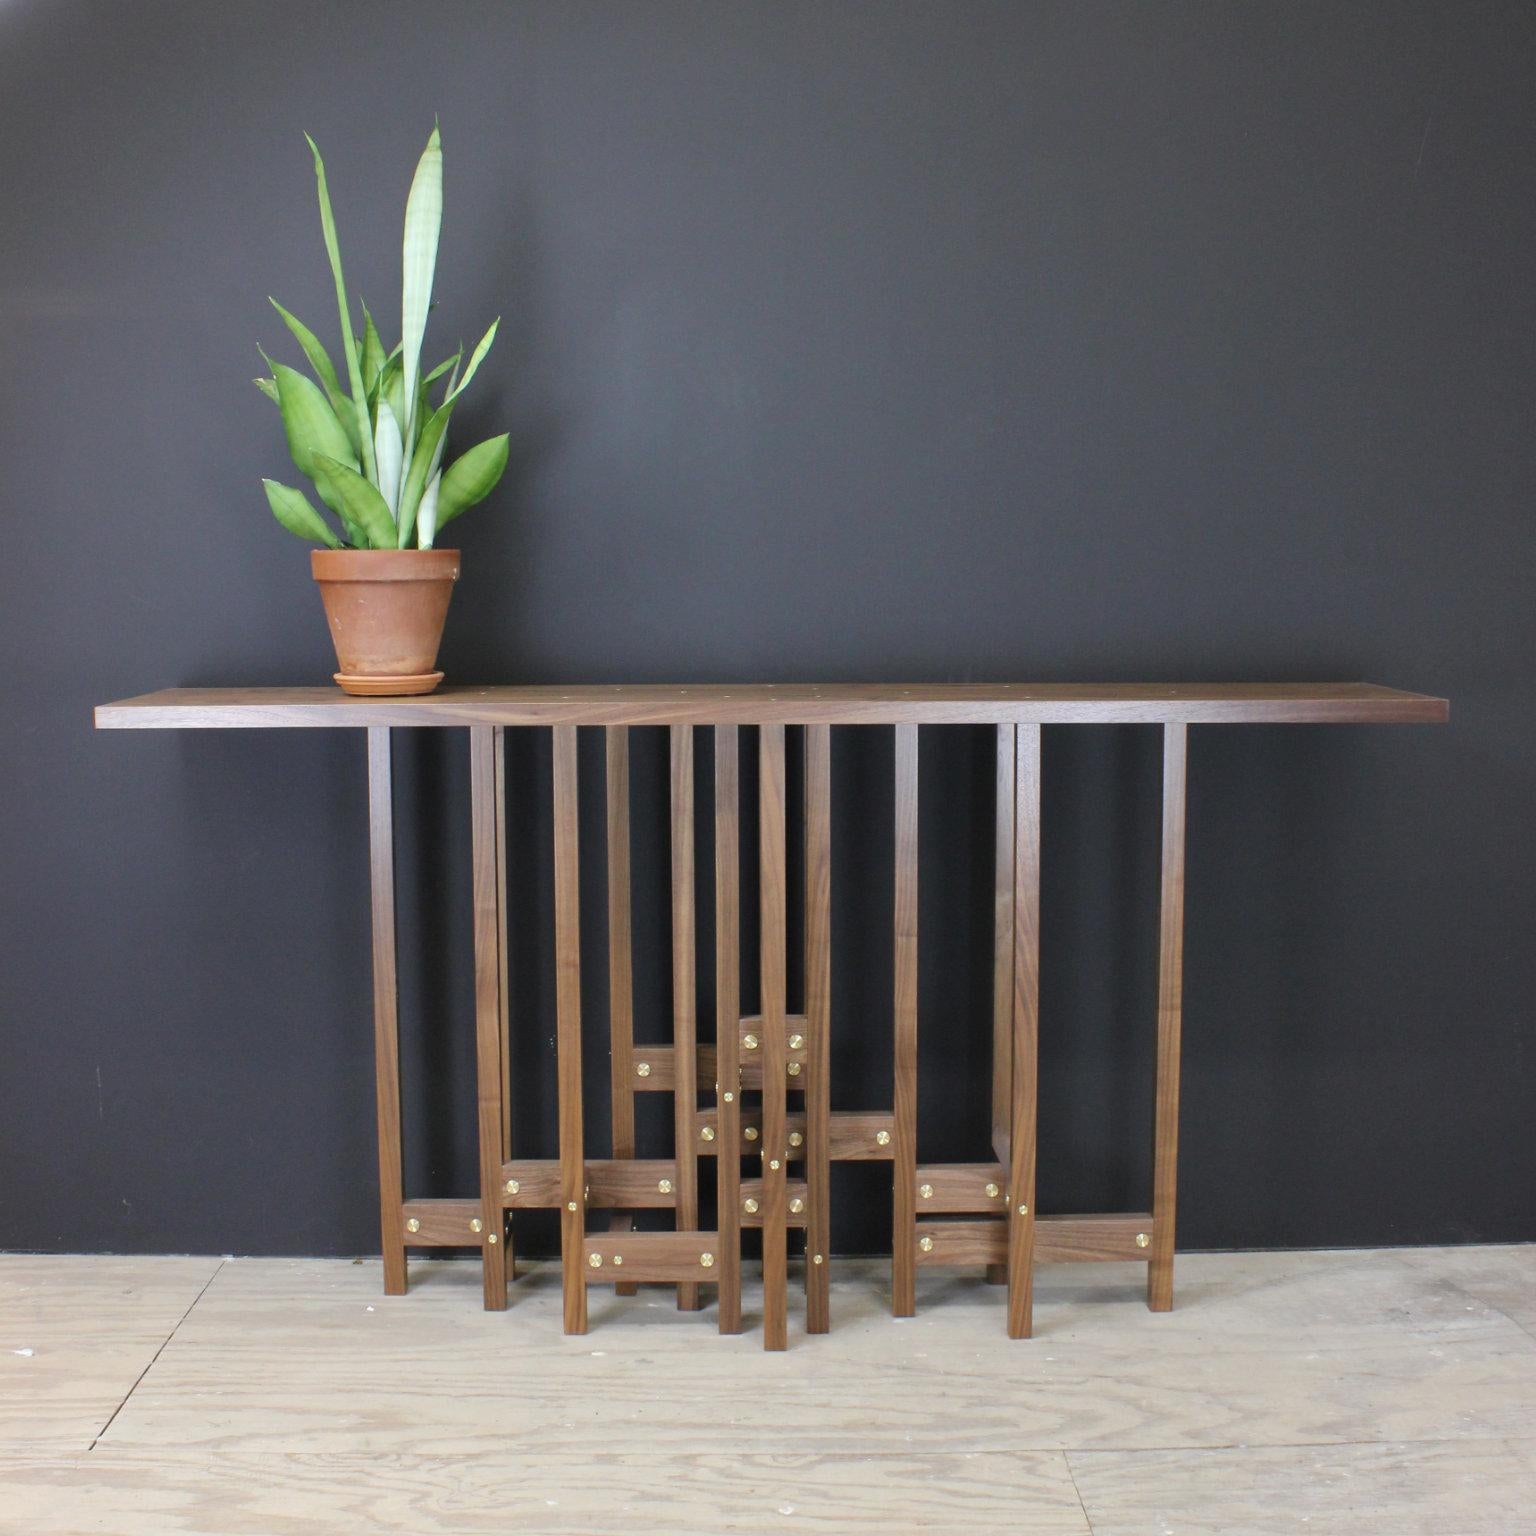 The Mneme hall table continues my exploration of visual complexity with an uncommon amount of verticals and horizontals to make a table base. Mneme features horizontal elements that are twice the width of the base grid. They are densest and highest